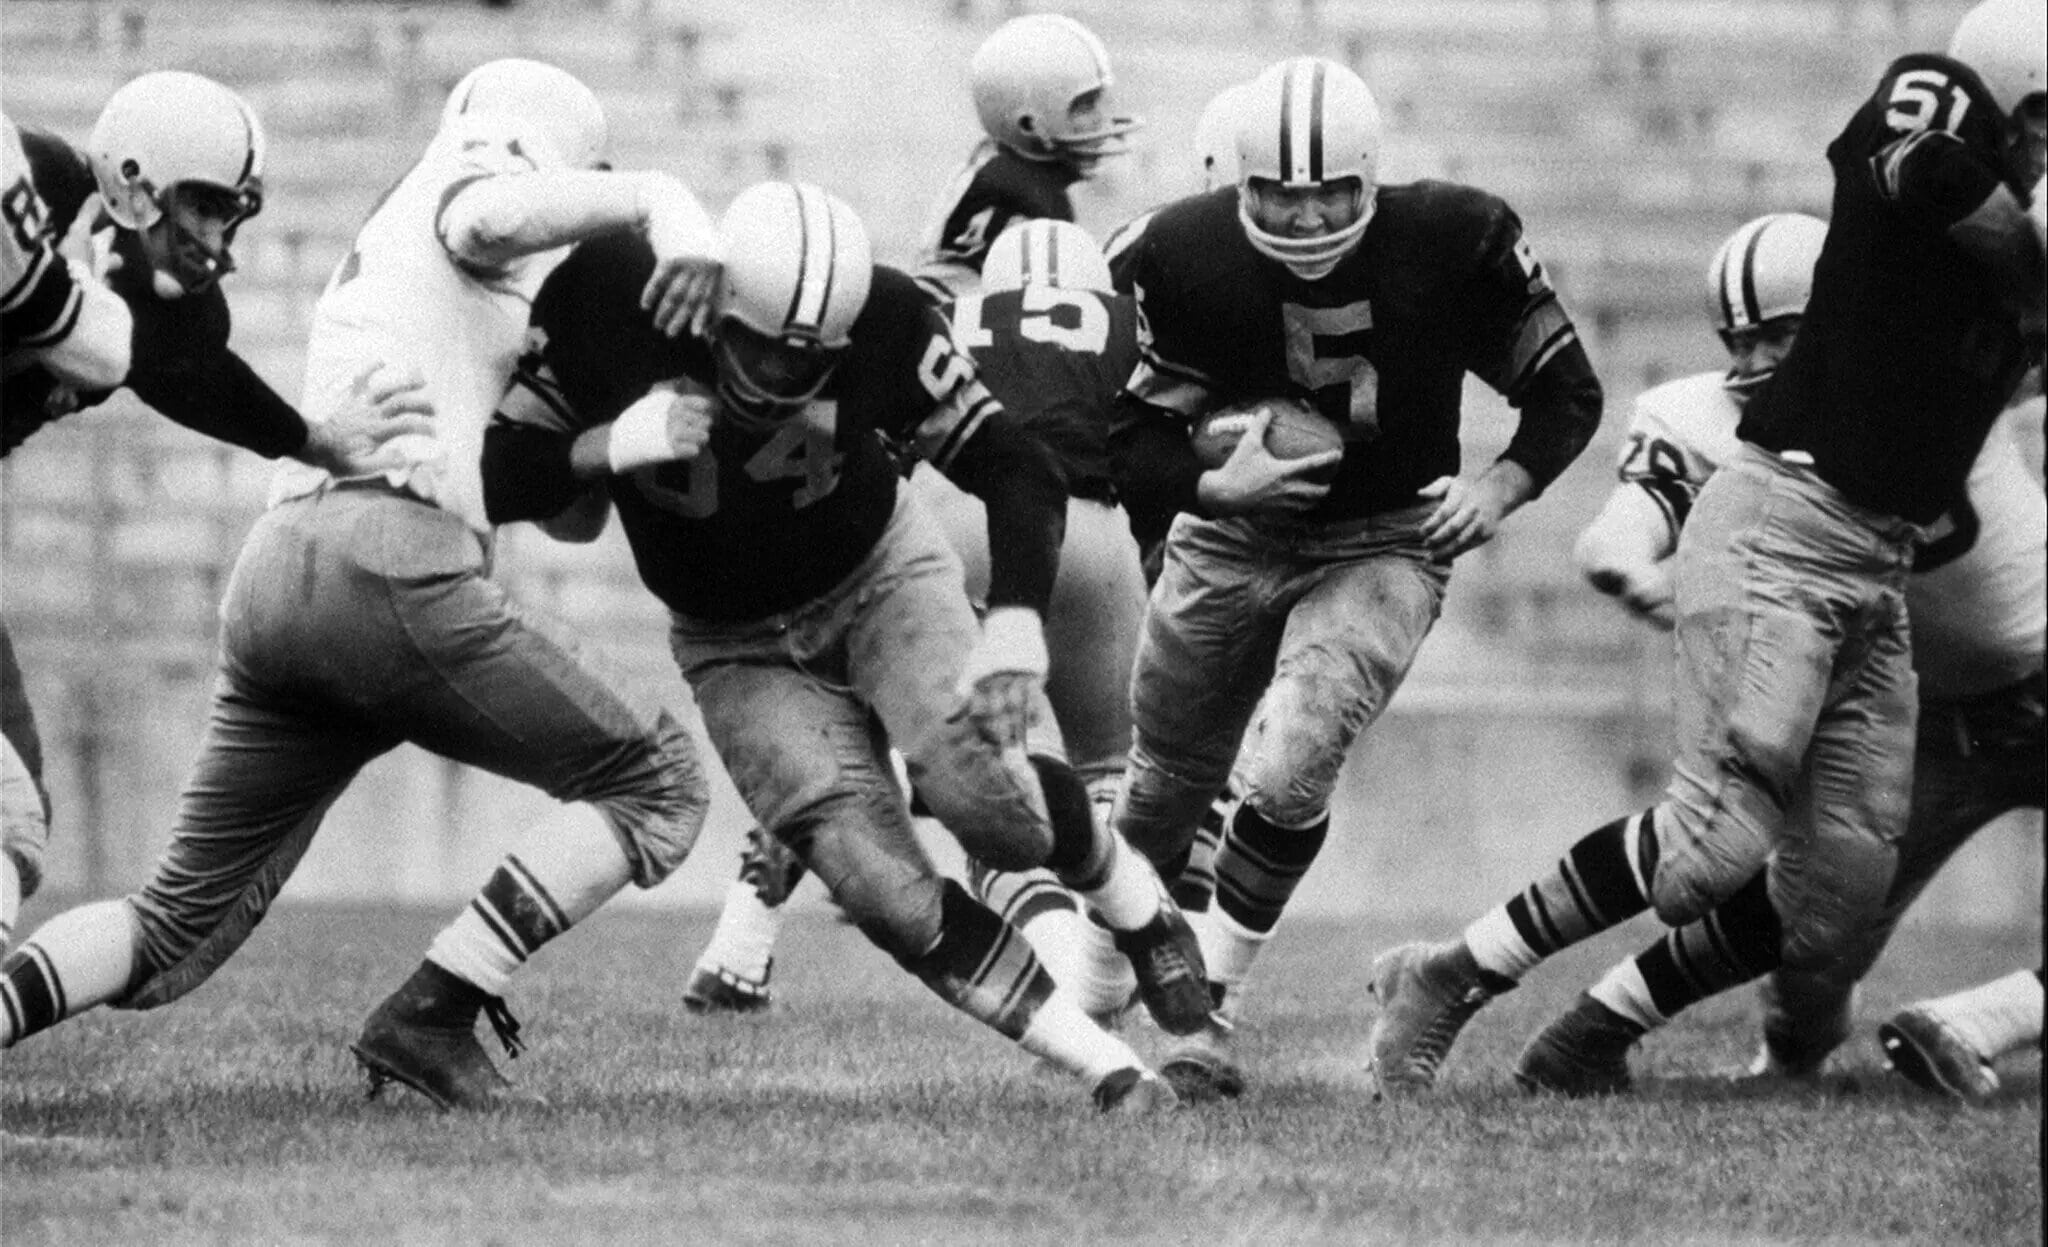 Hornung (No. 5) breaks through the line during an intra-squad preseason game in August 1959.